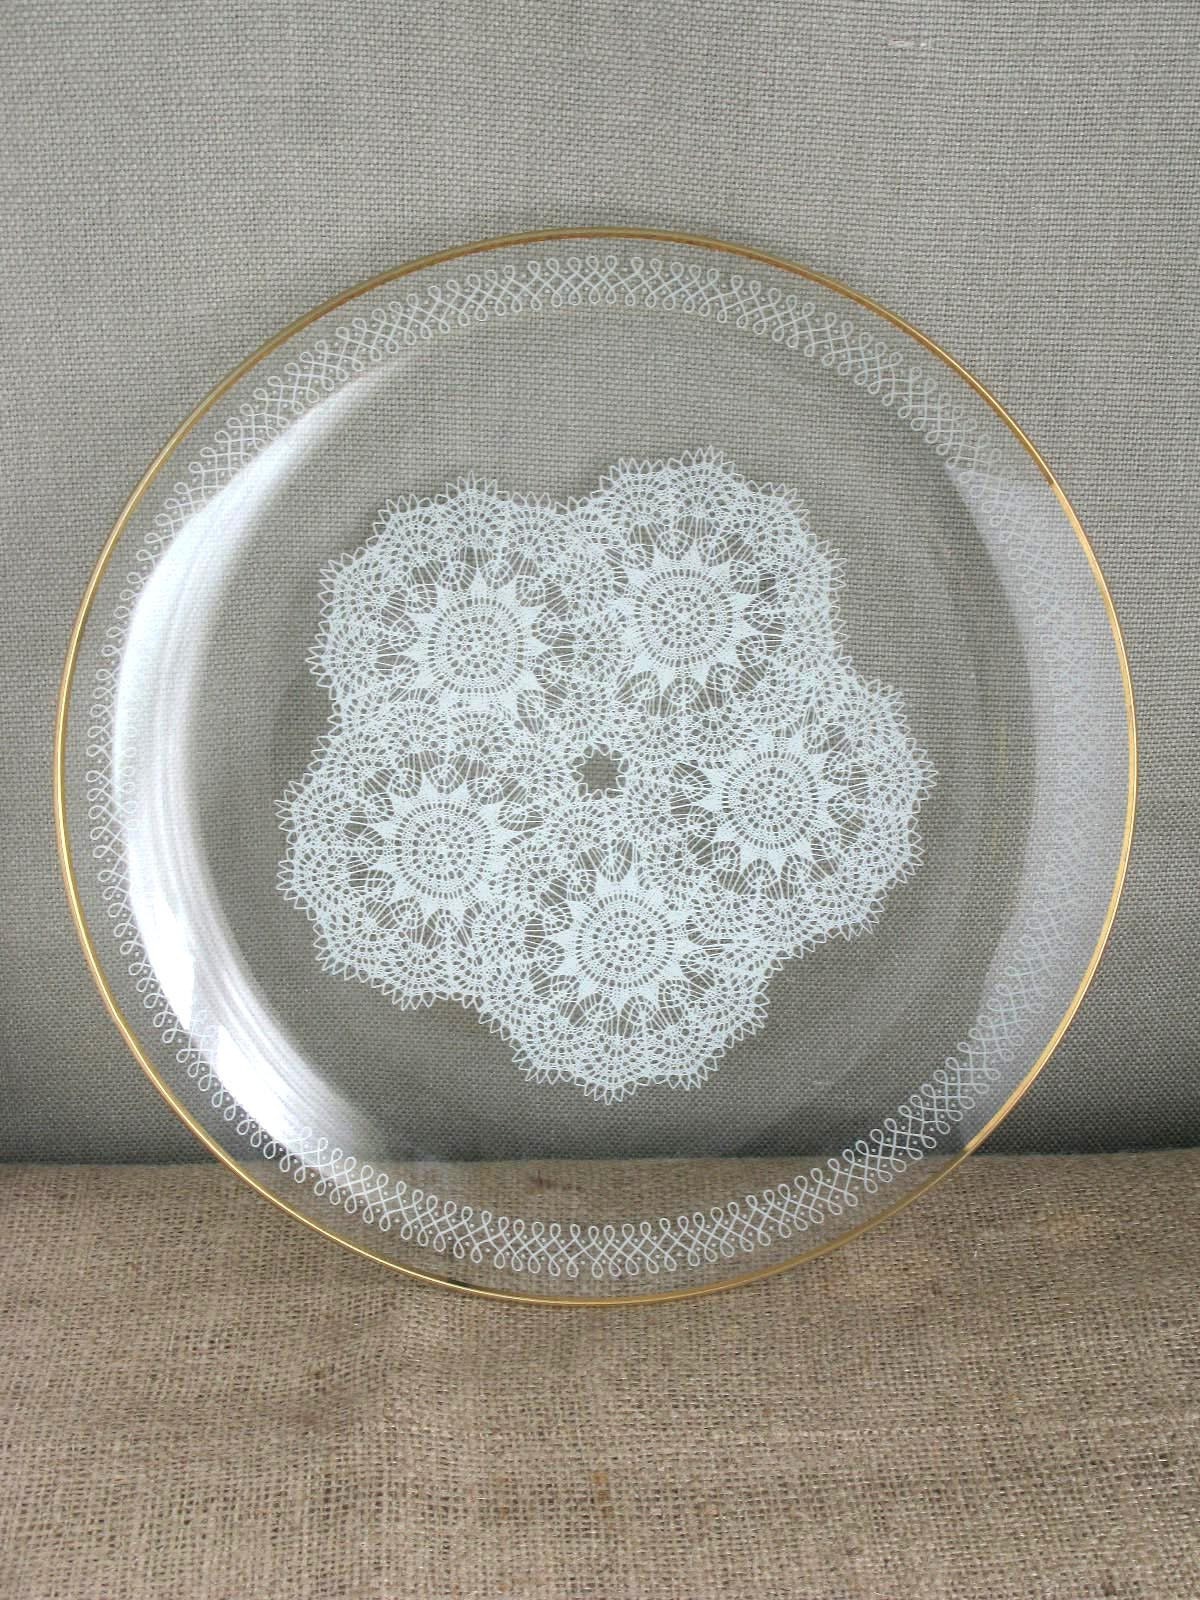 Danish Modern Serving Tray with Lace Pattern